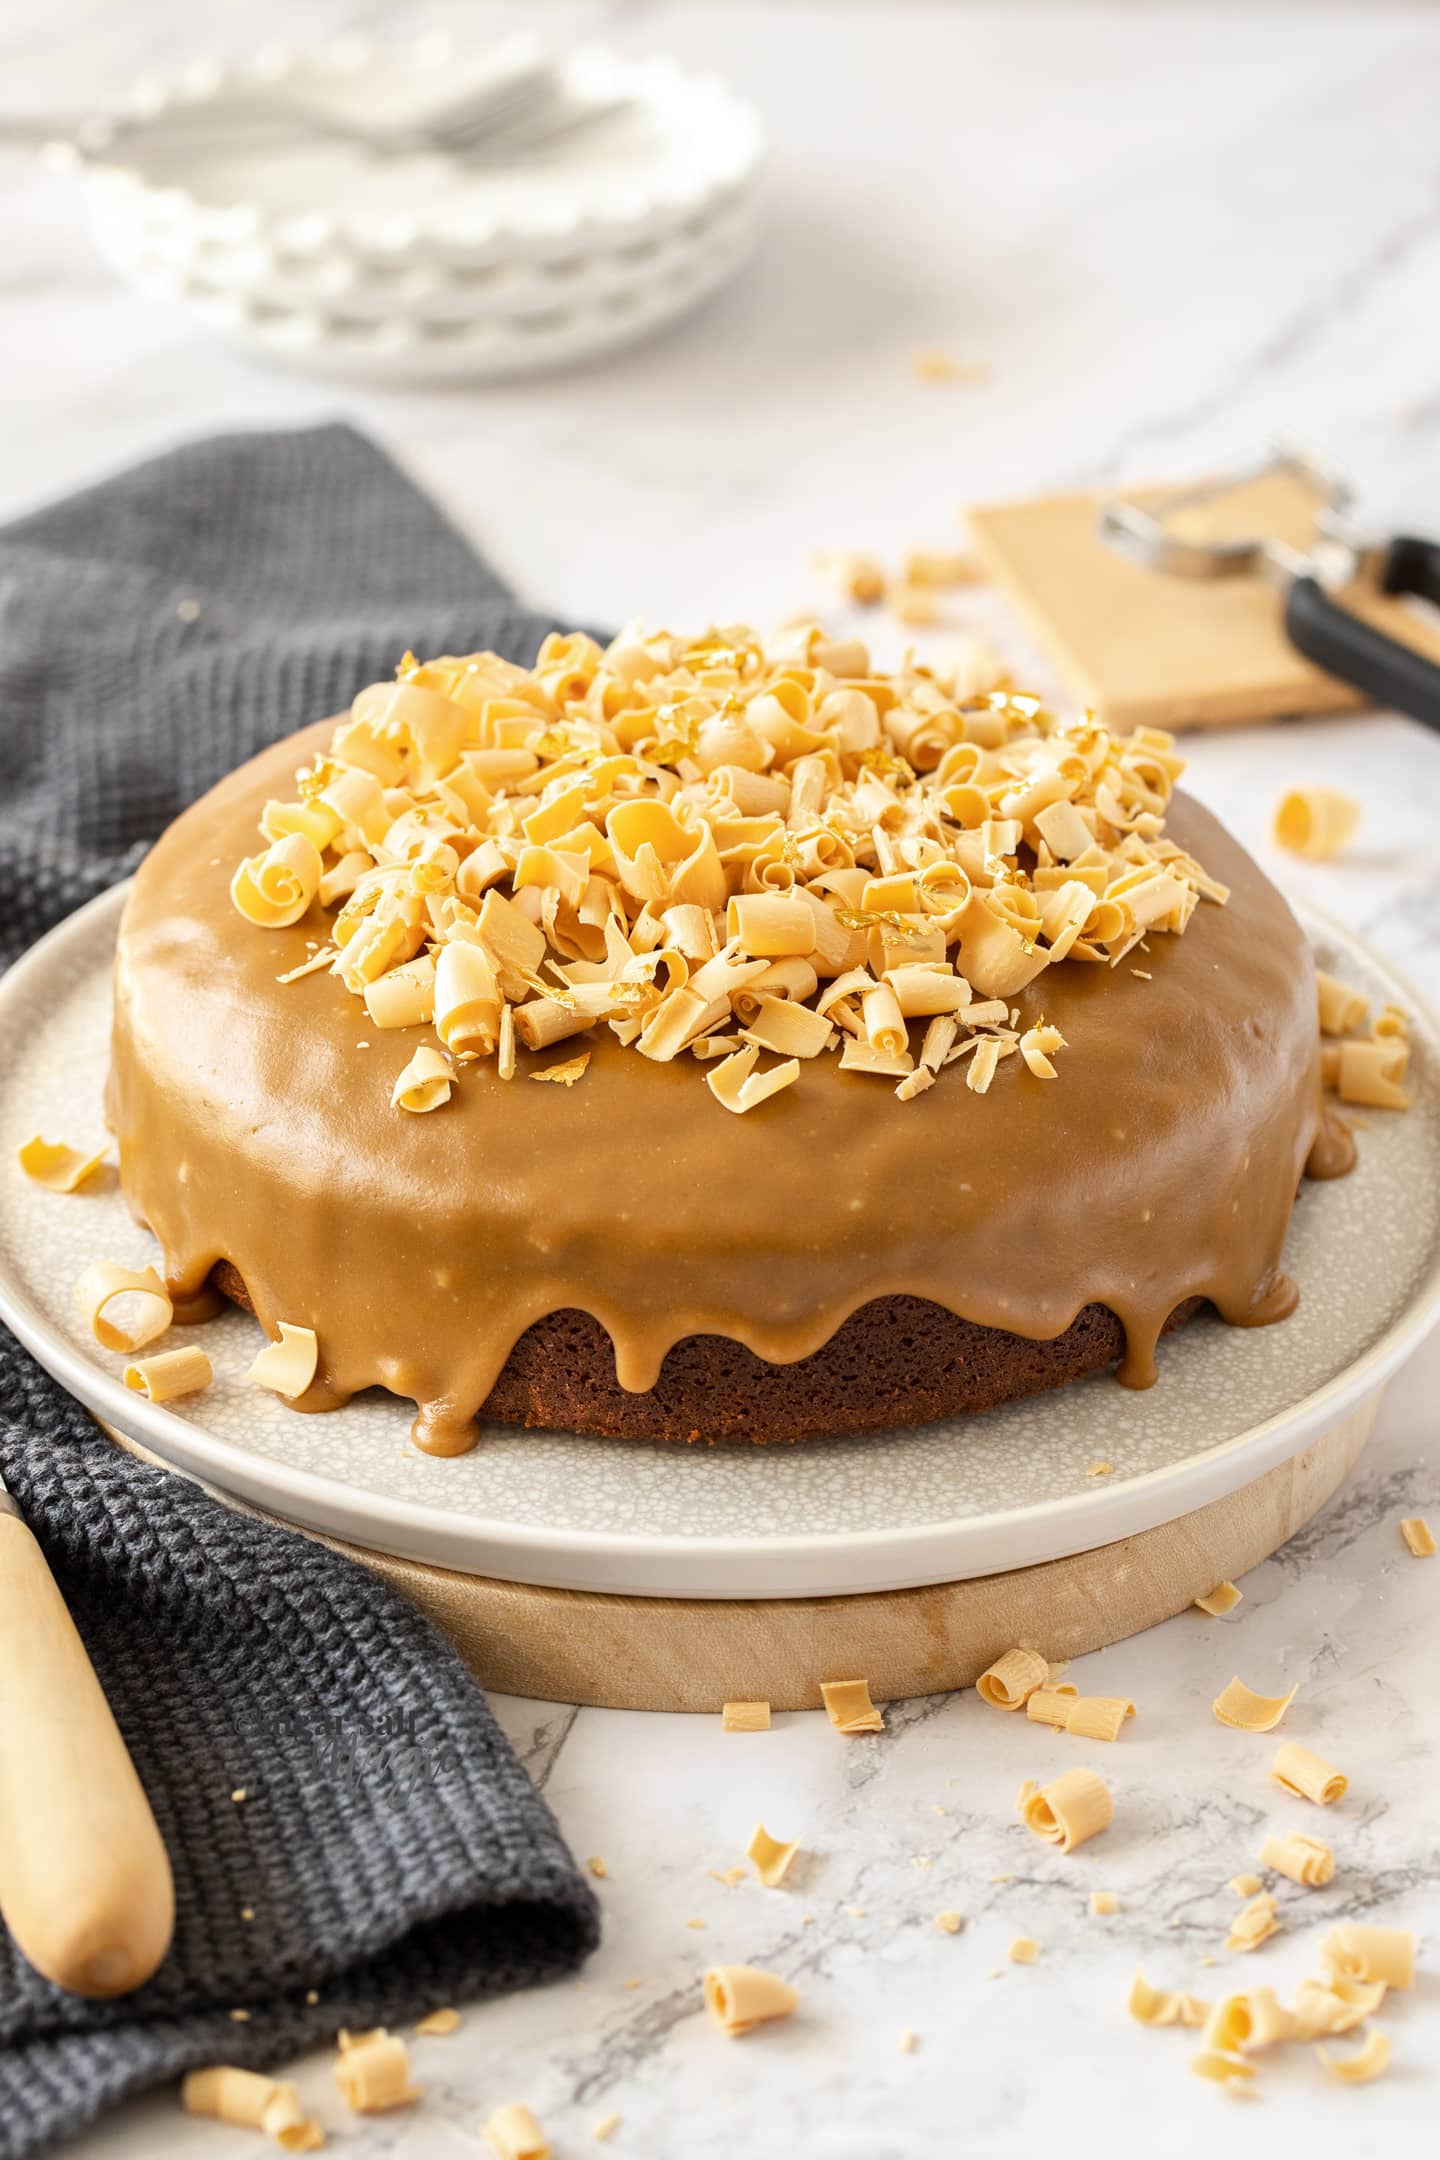 A caramel coloured cake topped with white chocolate on a white plate